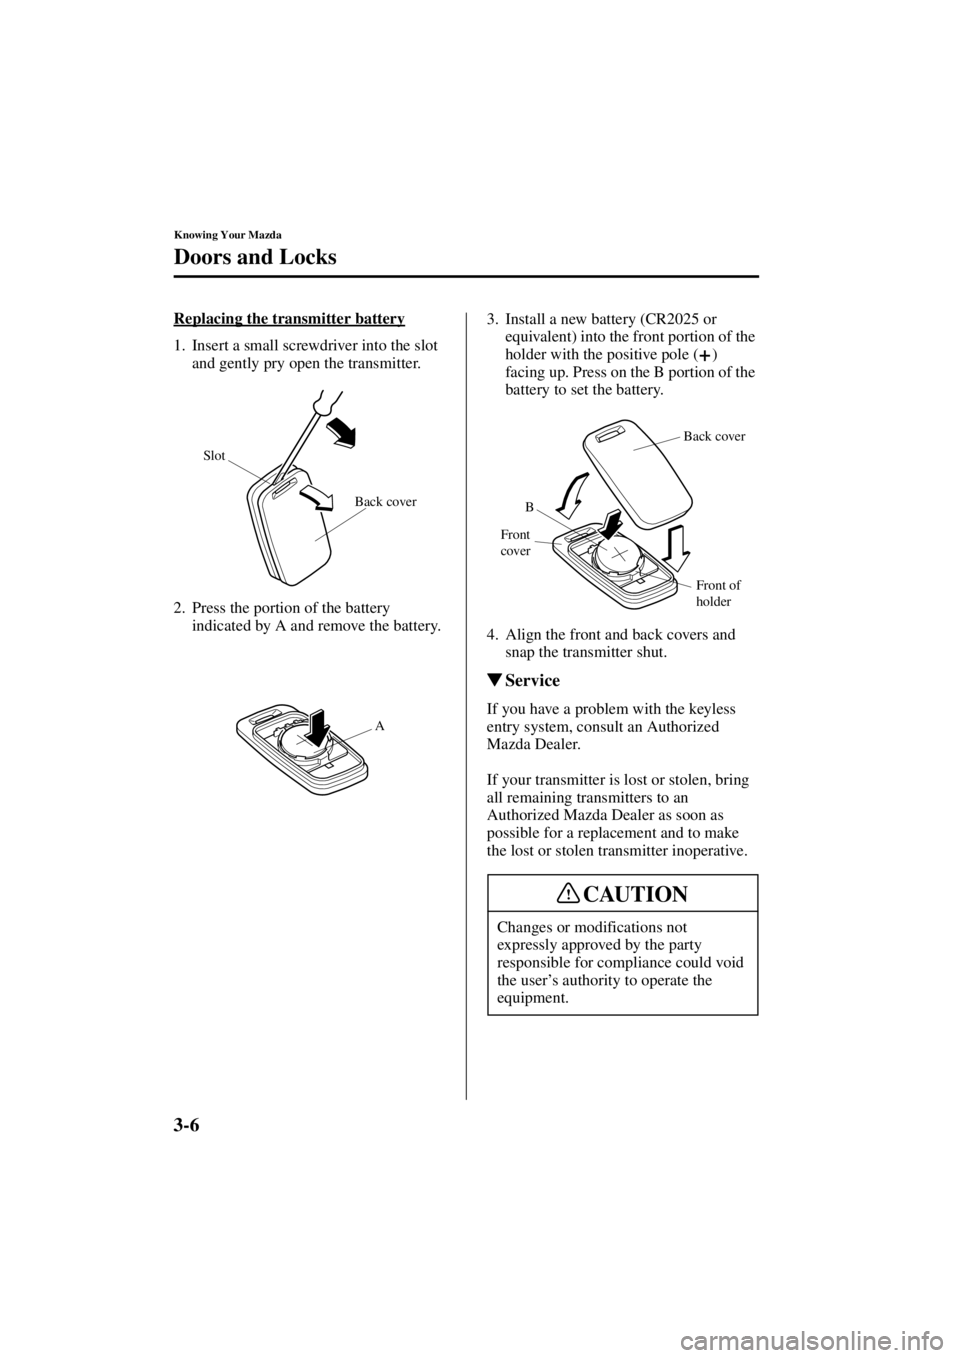 MAZDA MODEL 3 5-DOOR 2004  Owners Manual 3-6
Knowing Your Mazda
Doors and Locks
Form No. 8S18-EA-03I
Replacing the transmitter battery
1. Insert a small screwdriver into the slot and gently pry open the transmitter.
2. Press the portion of t